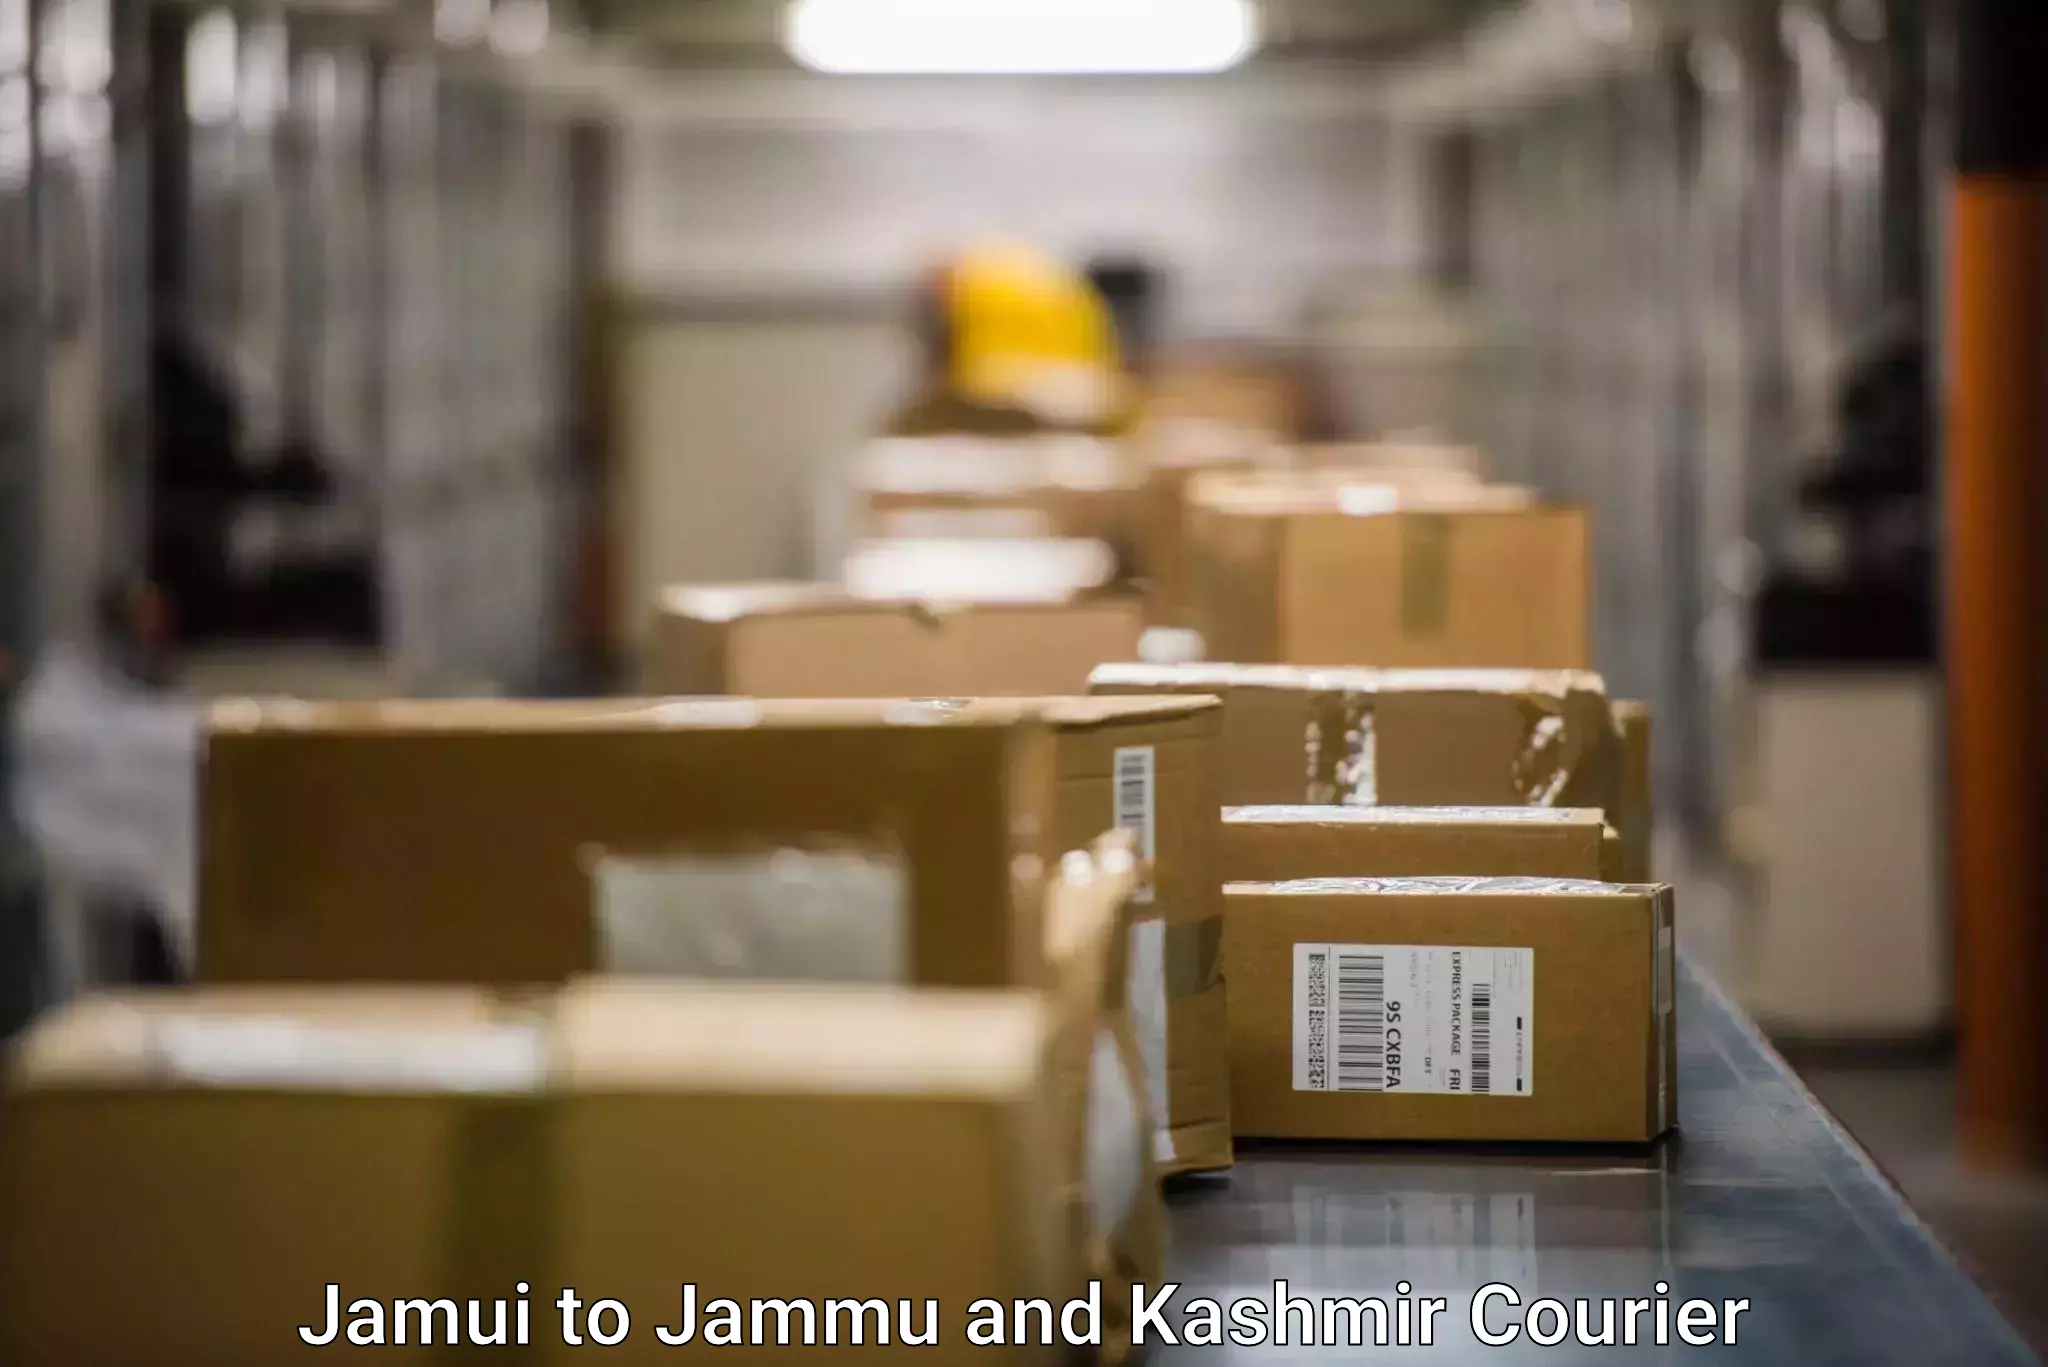 Professional courier handling Jamui to Budgam